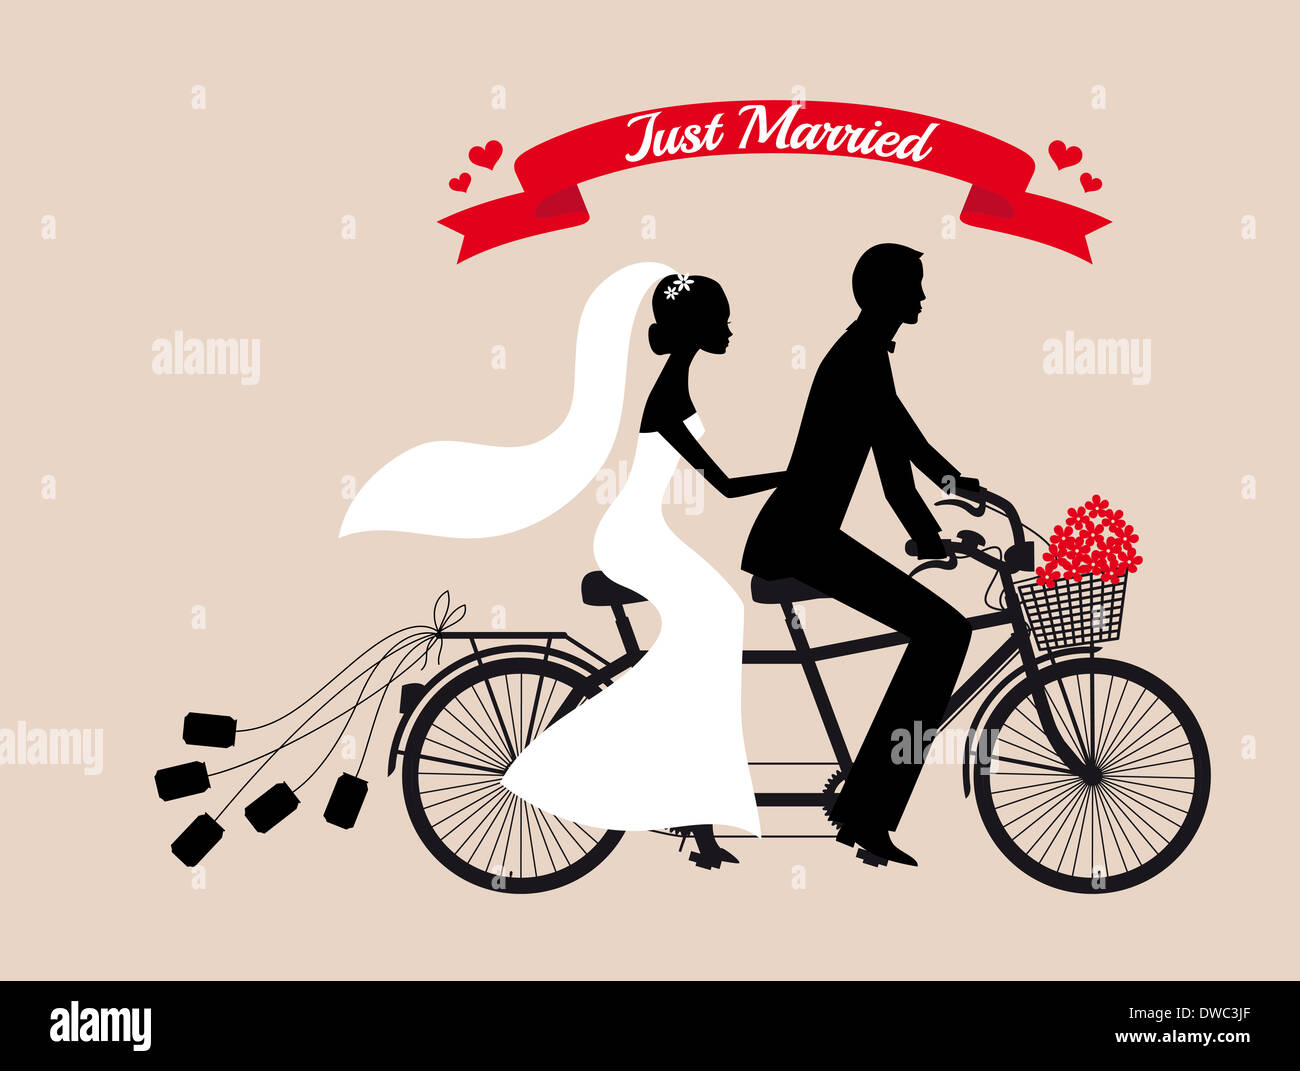 just married, wedding couple on tandem bicycle Stock Photo - Alamy